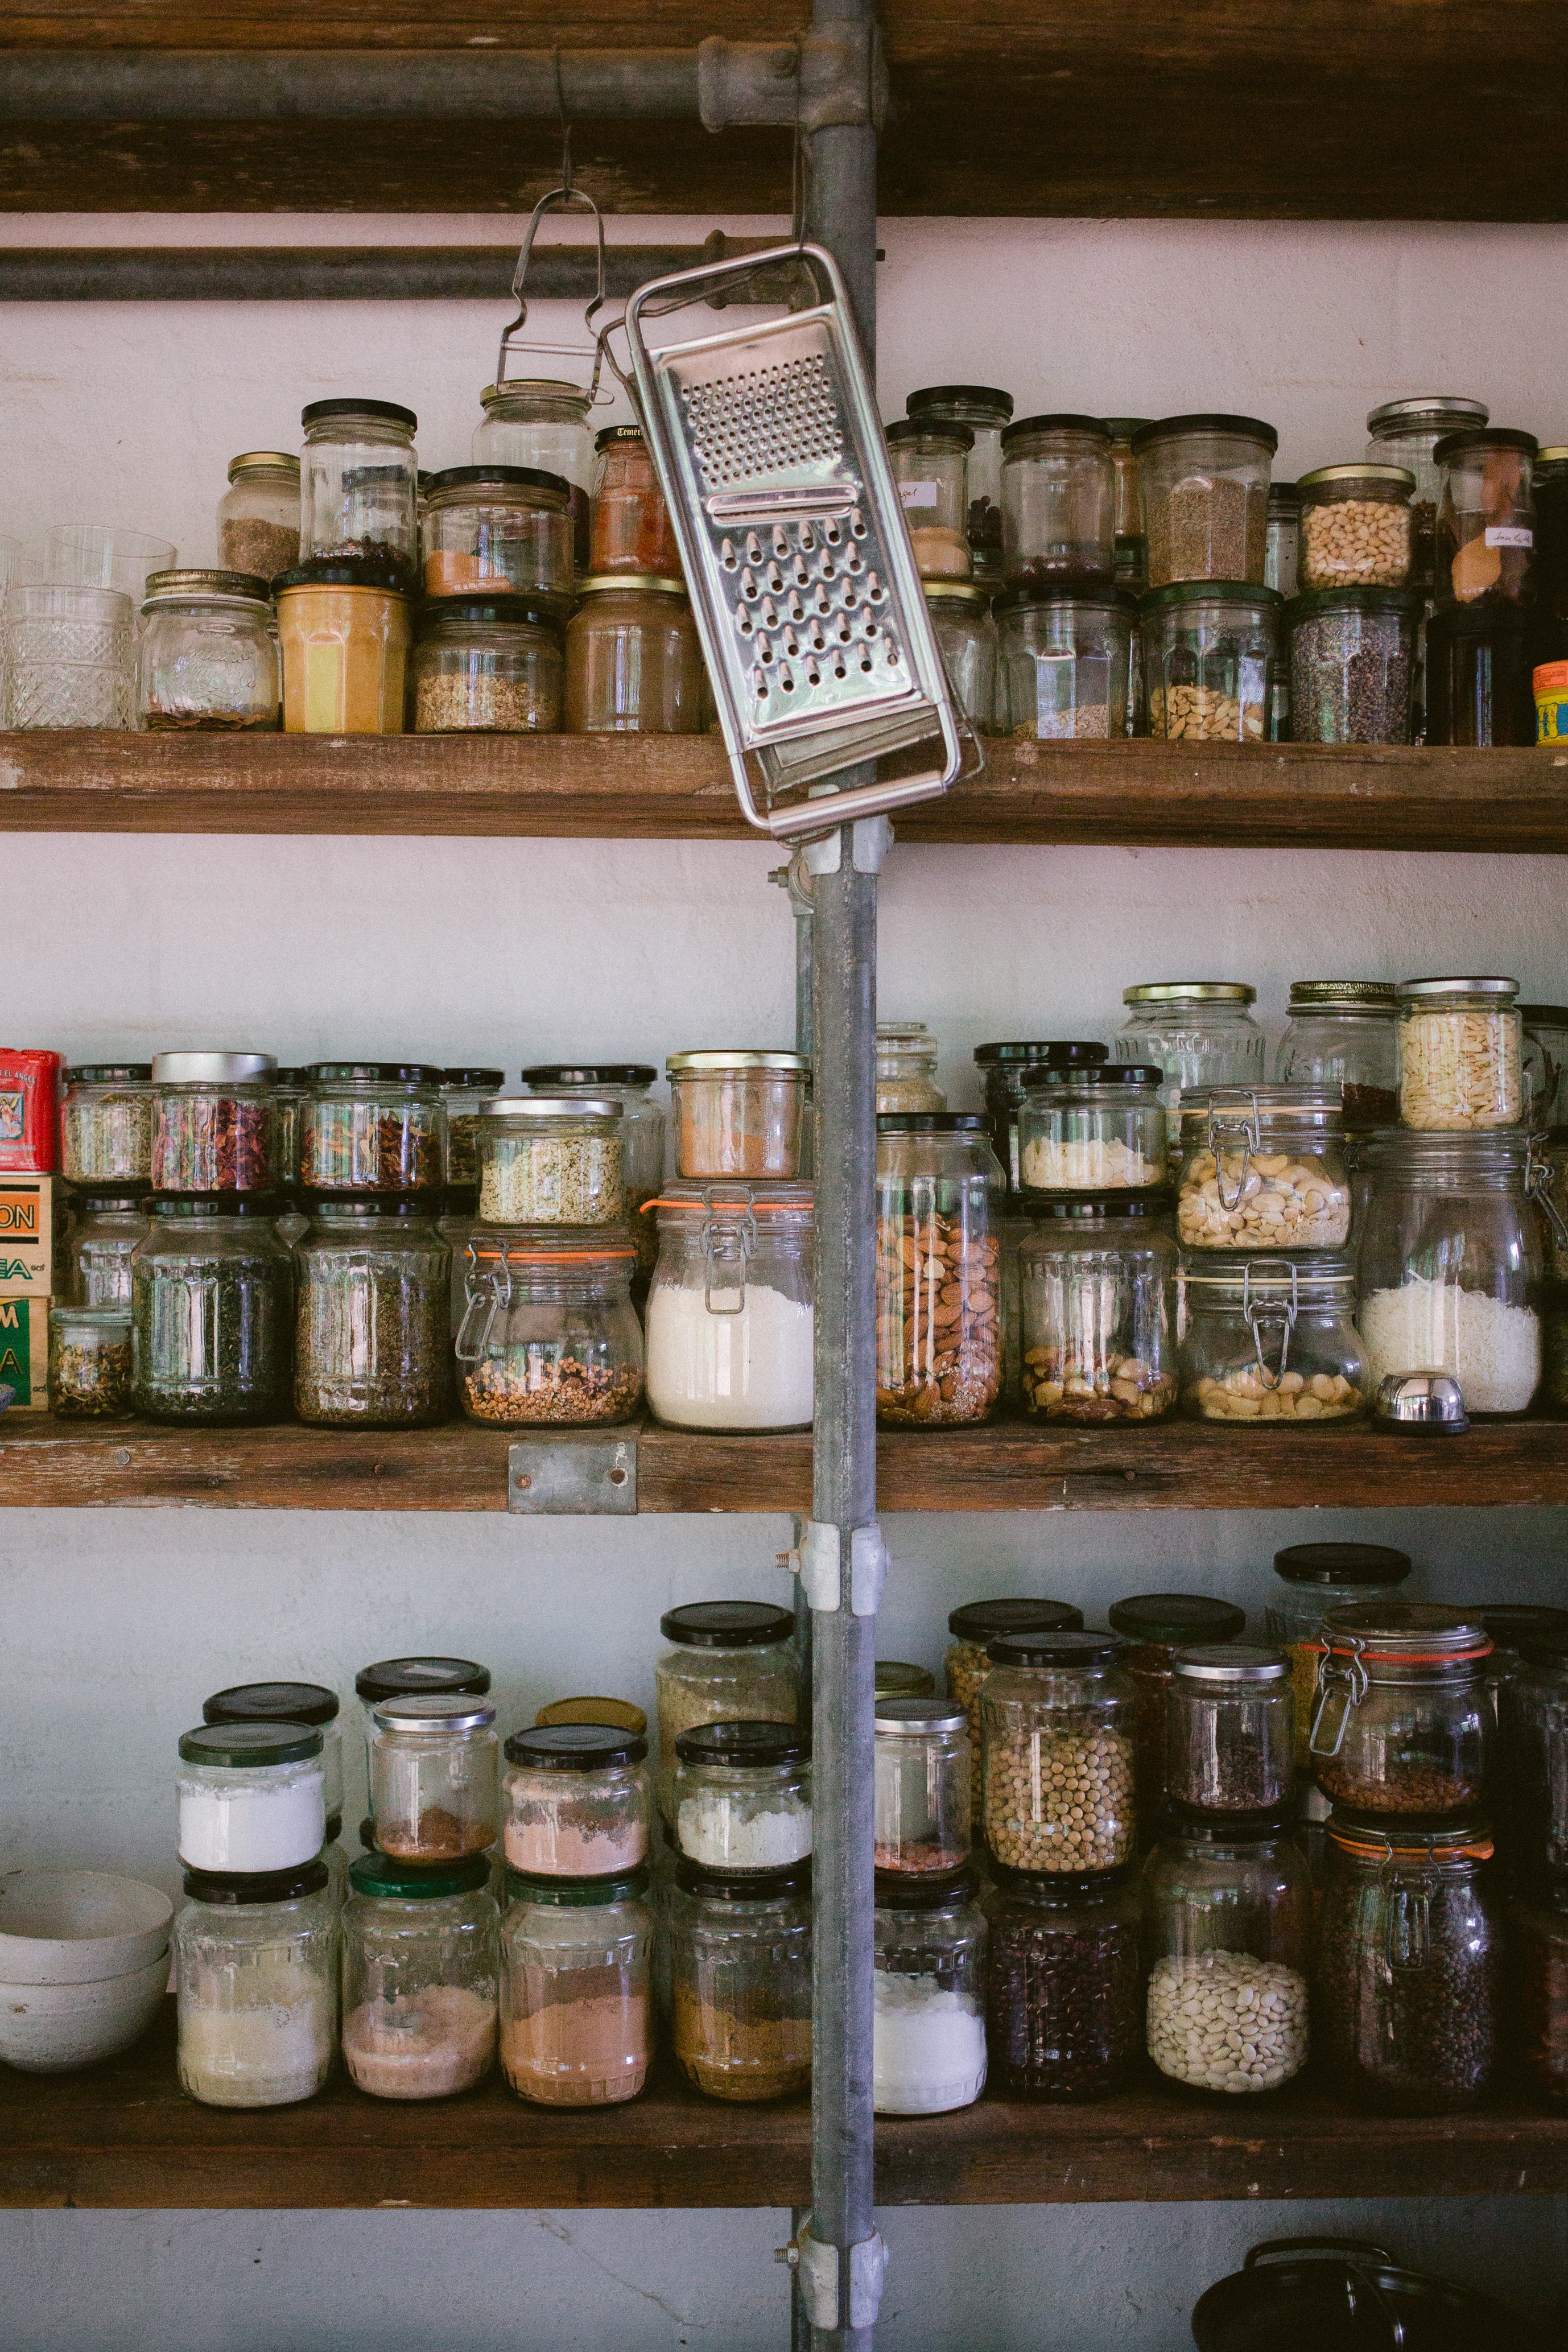 Photo of assorted jars with seeds and powders on rustic wooden shelves. In the center a metal pole from which hang a potato peeler and a grater. Your pantry will never start like this: you will build it slowly, picking up new ingredients as you learn. Same for other skills!